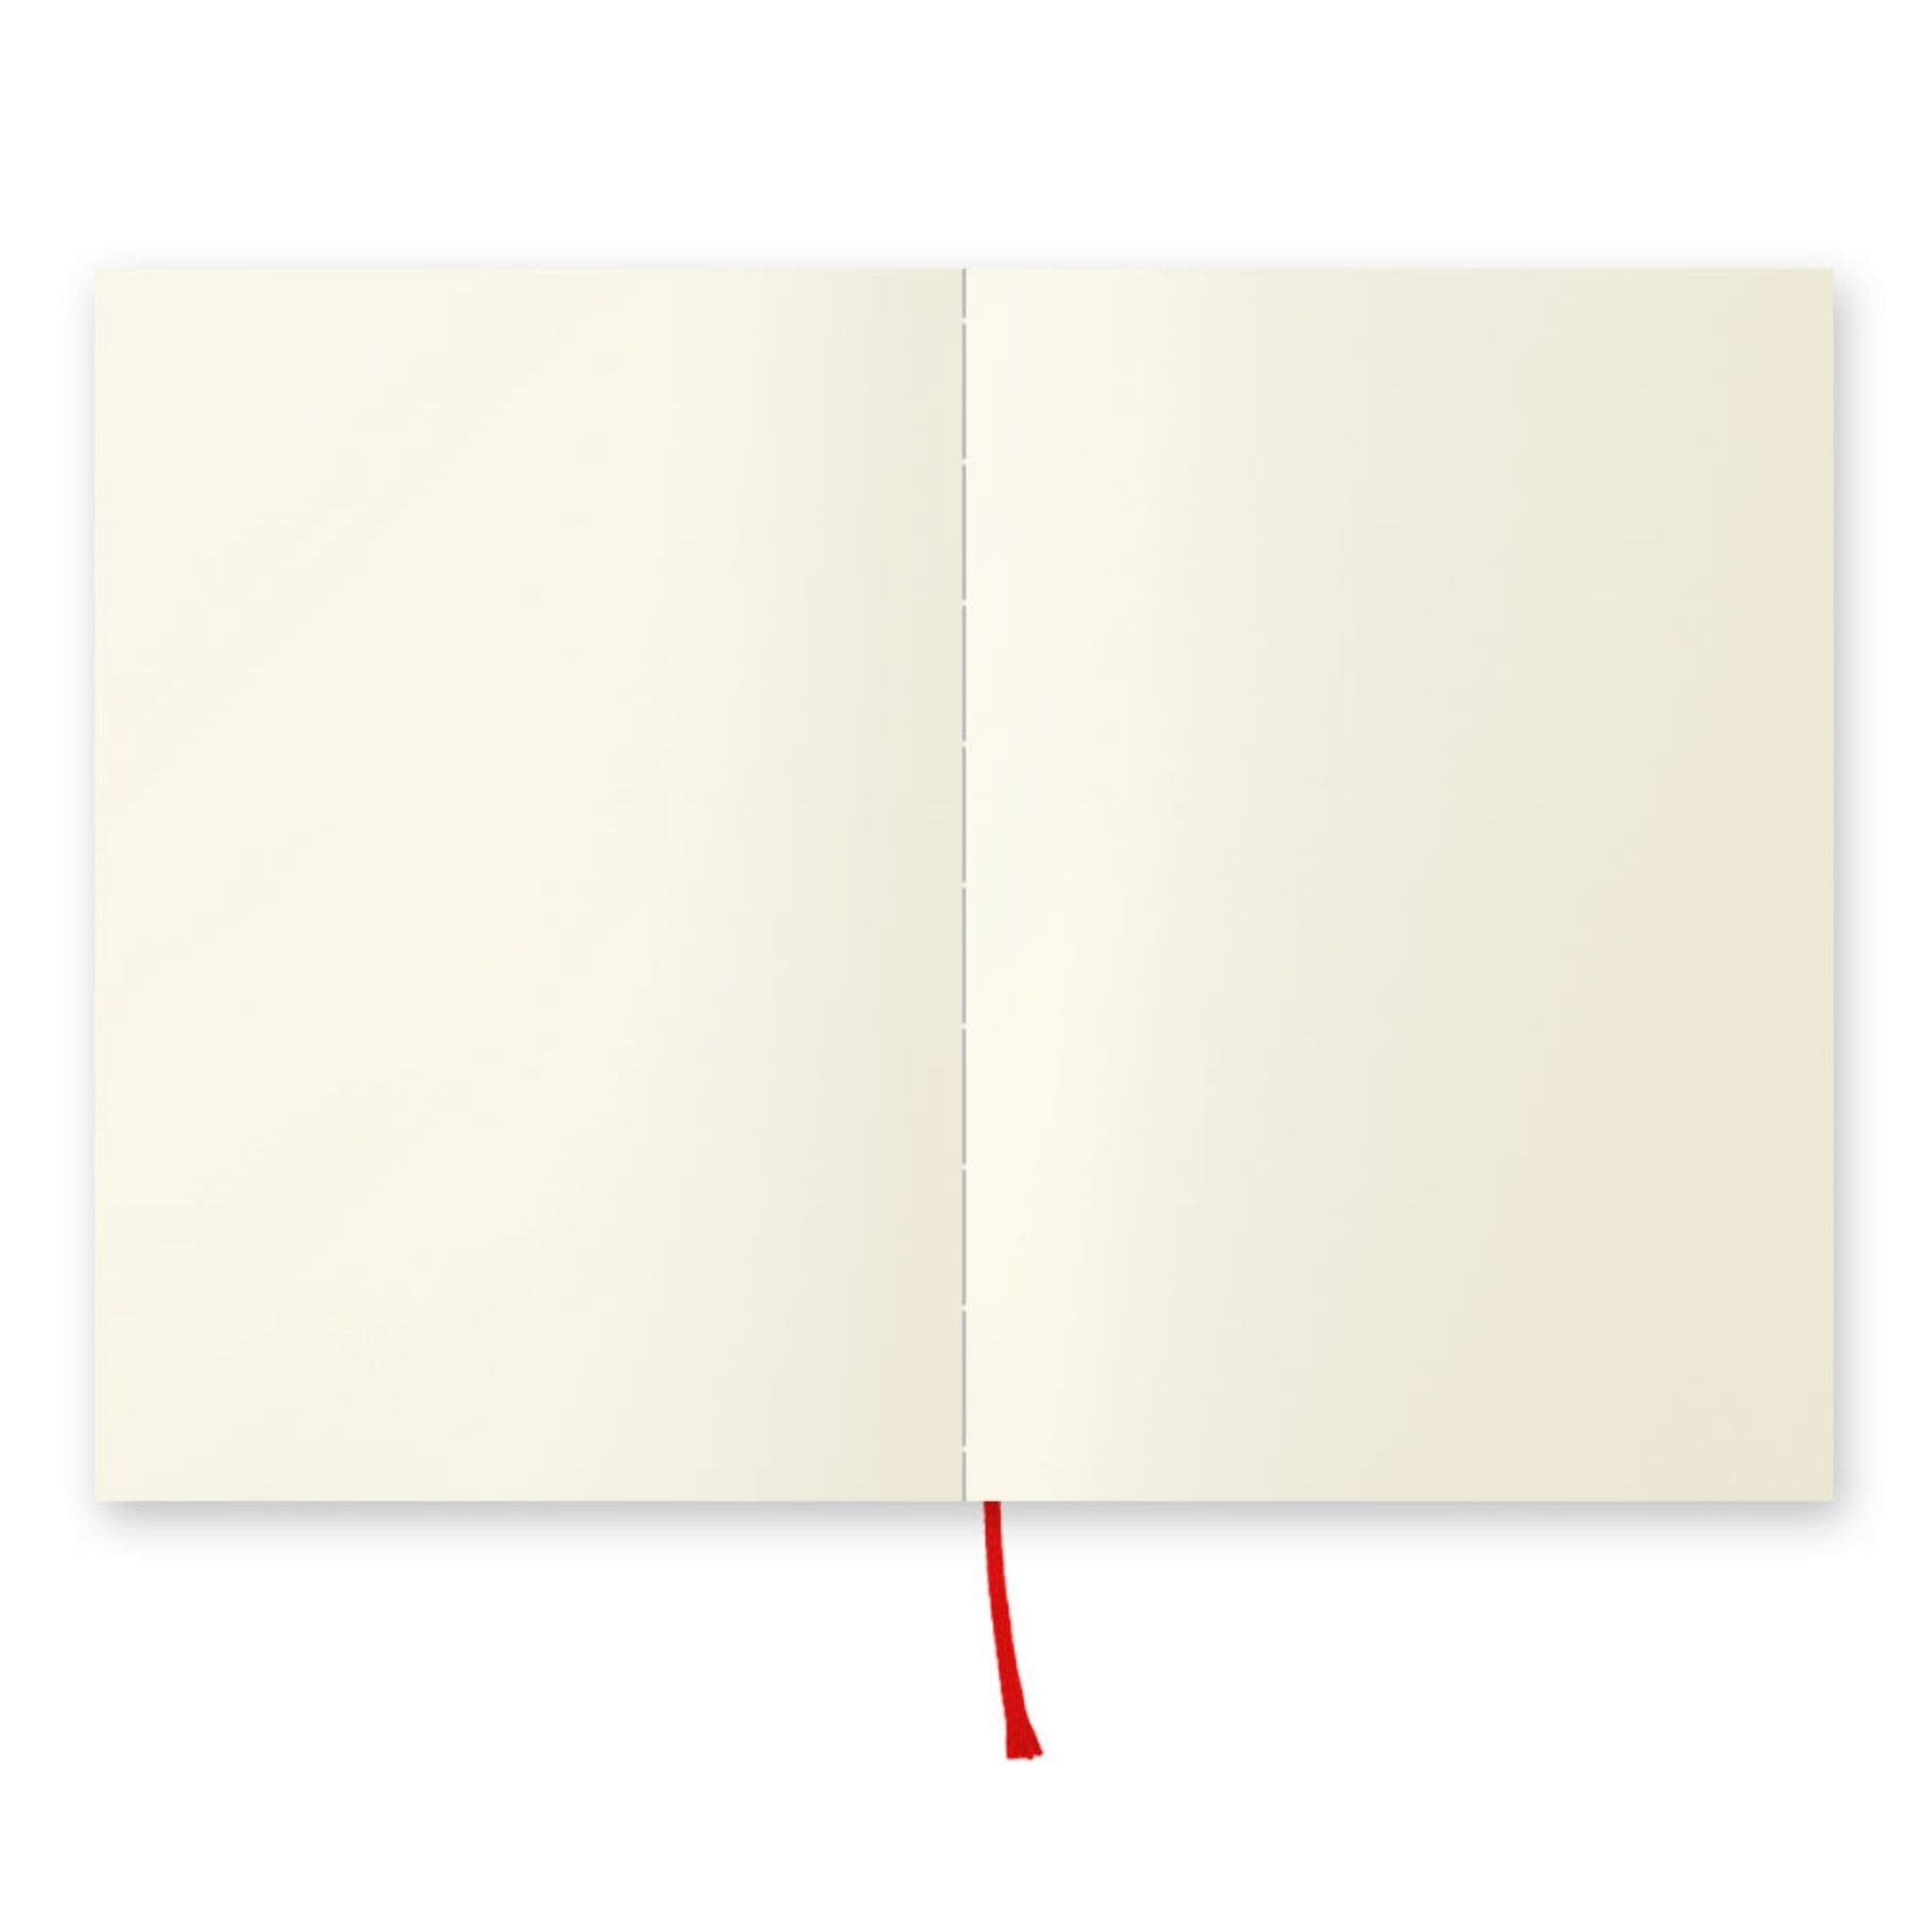 Midori MD A6 Plain Notebook with blank pages - Paper Kooka